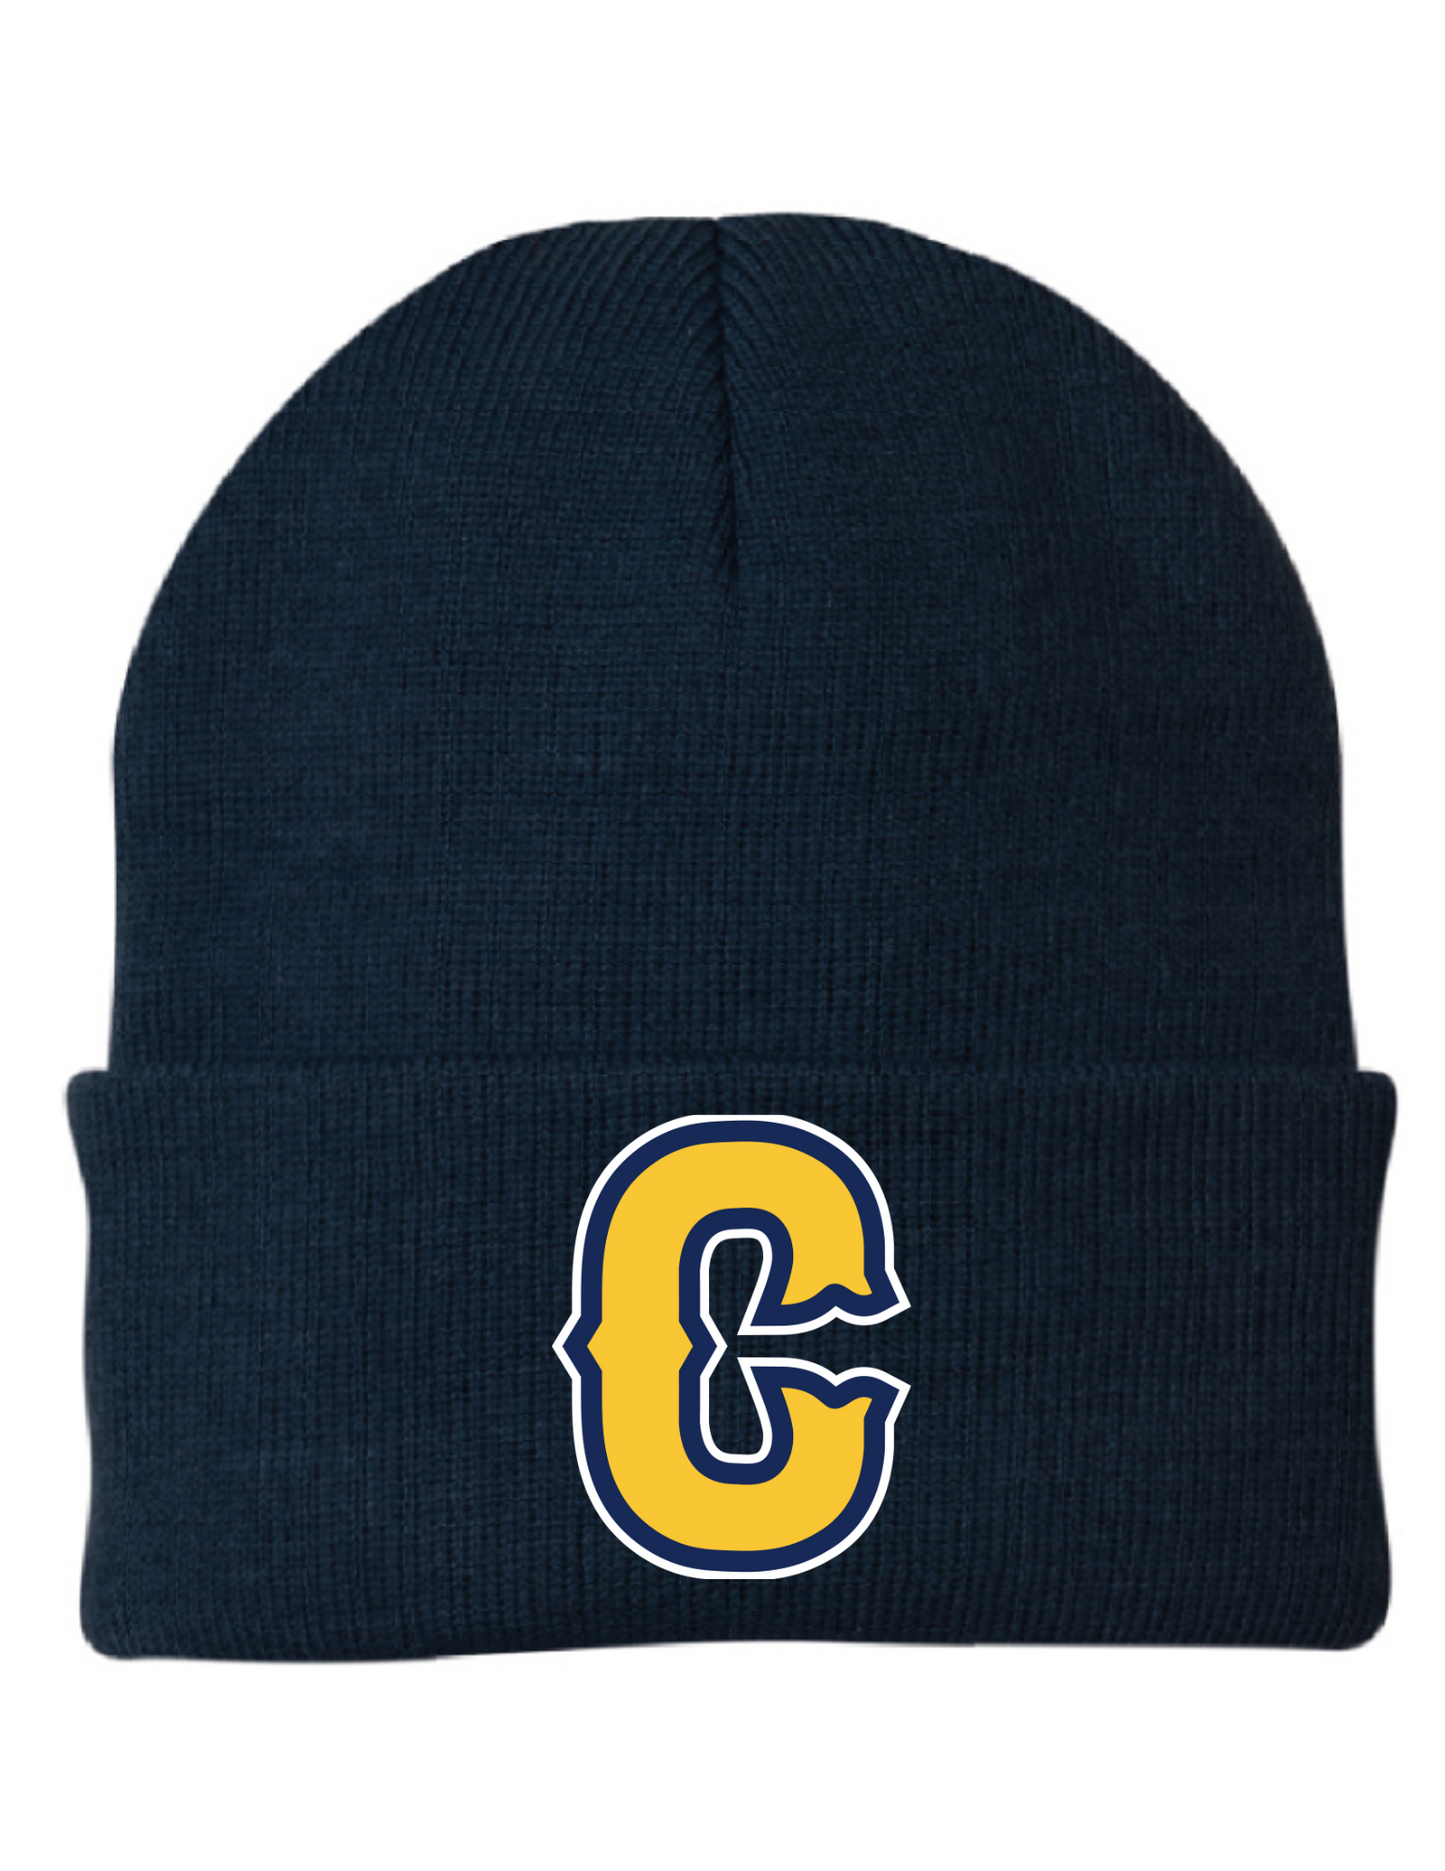 Cohoes Little League Embroidered Beanie